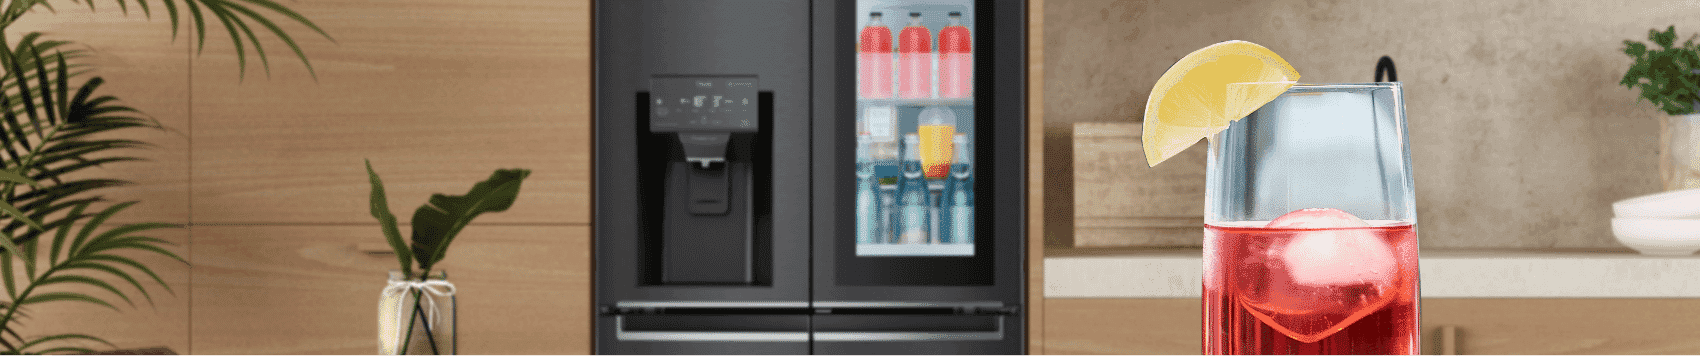 LG InstaView Fridge with Craft Ice feature